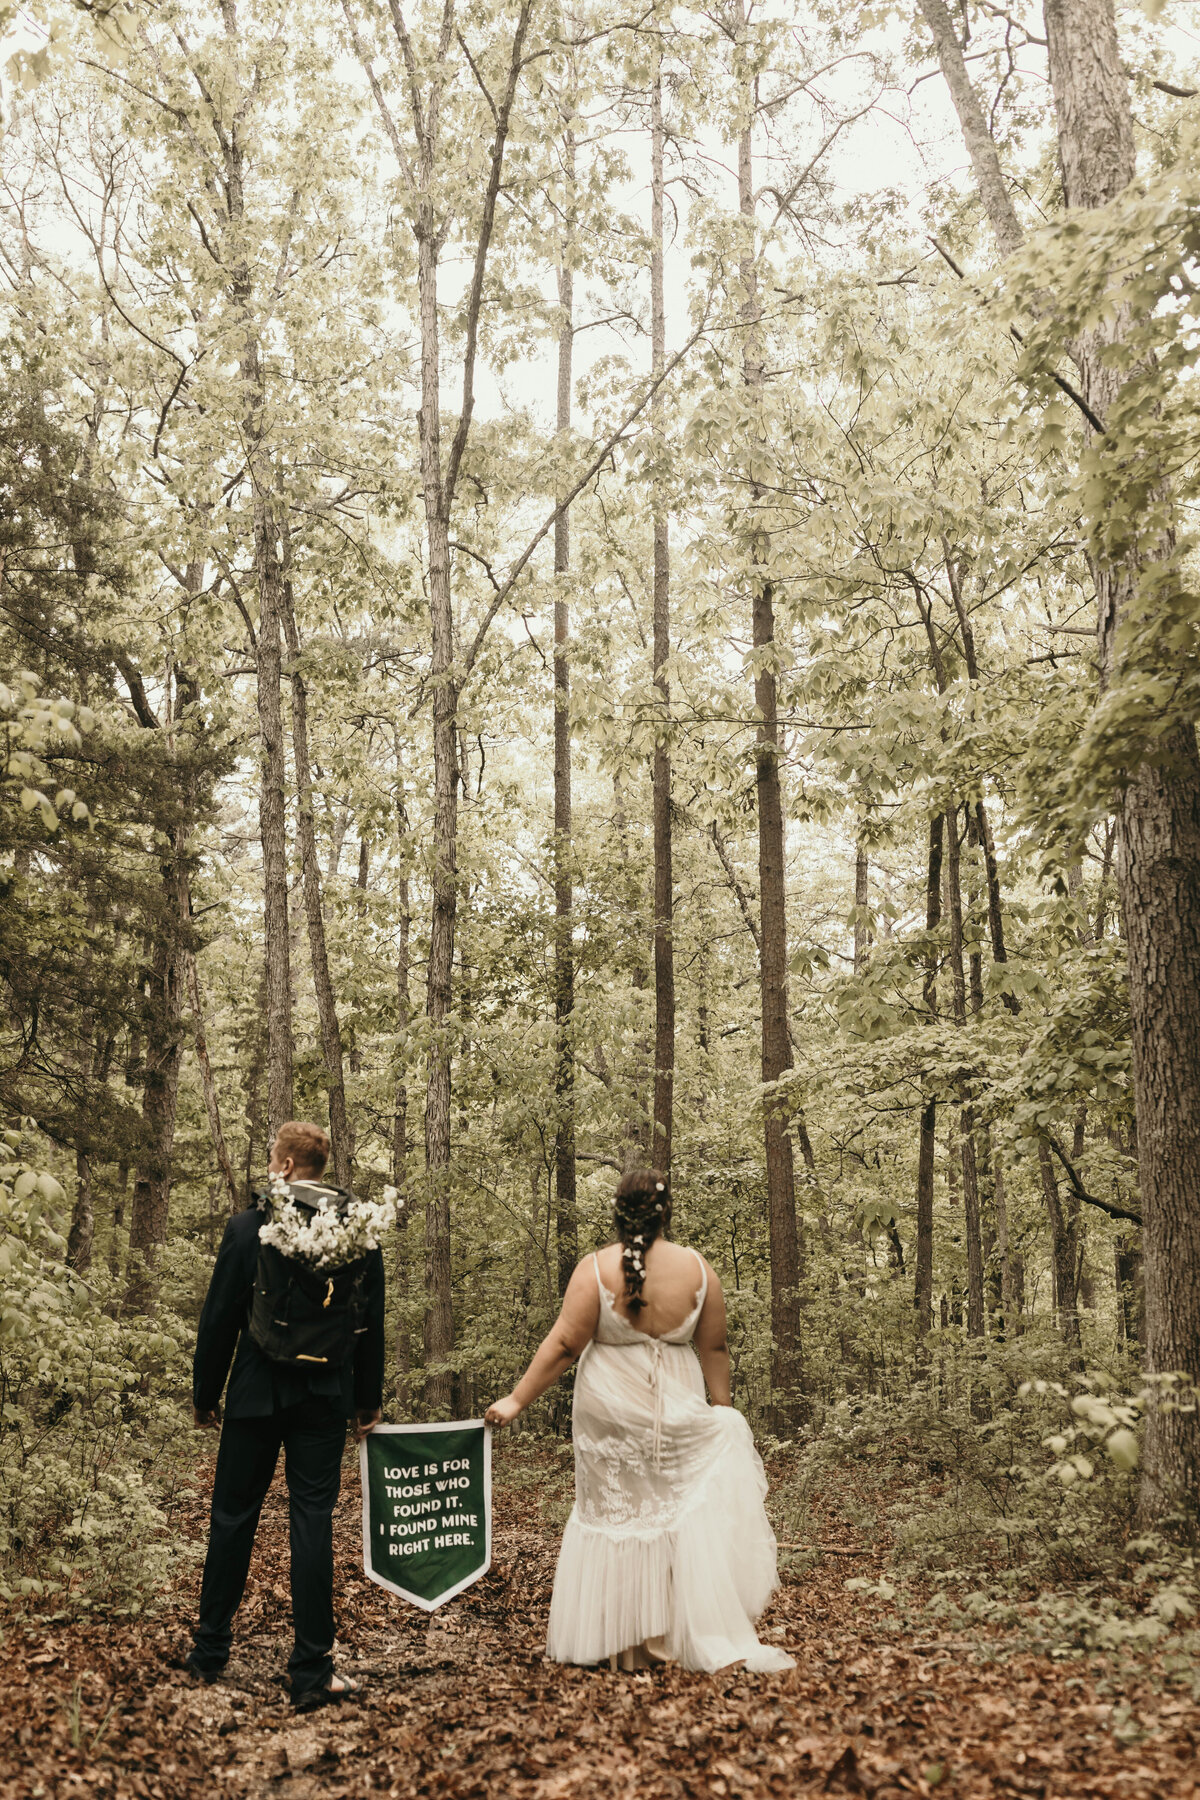 couple holding banner, walking through the woods.